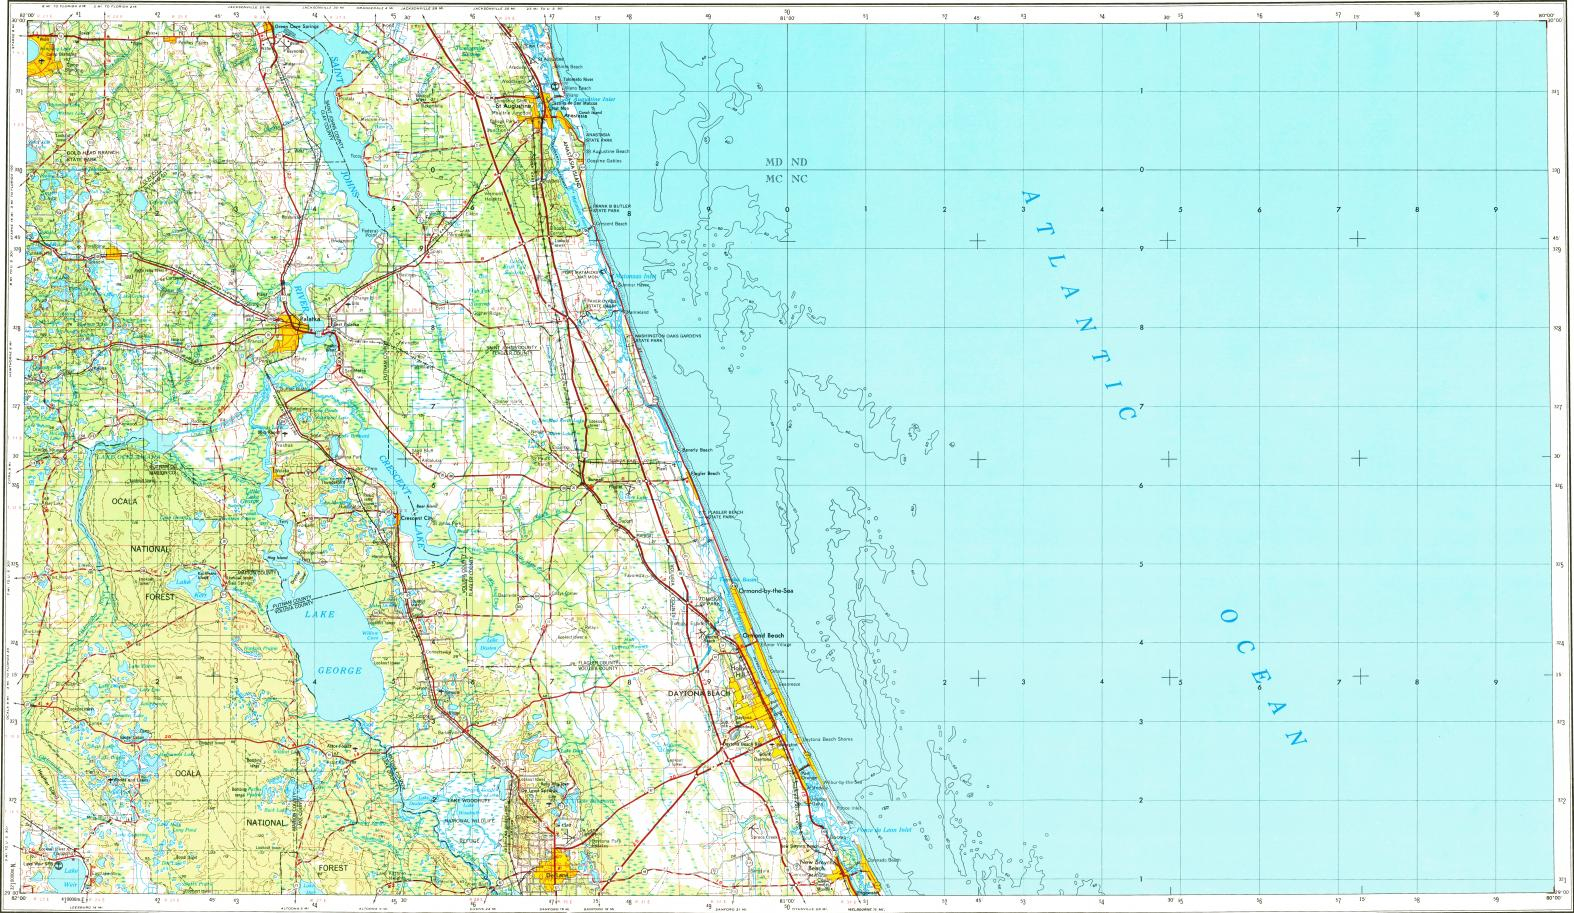 Download Topographic Map In Area Of Daytona Beach, Port Orange - Map Of Daytona Beach Florida Area